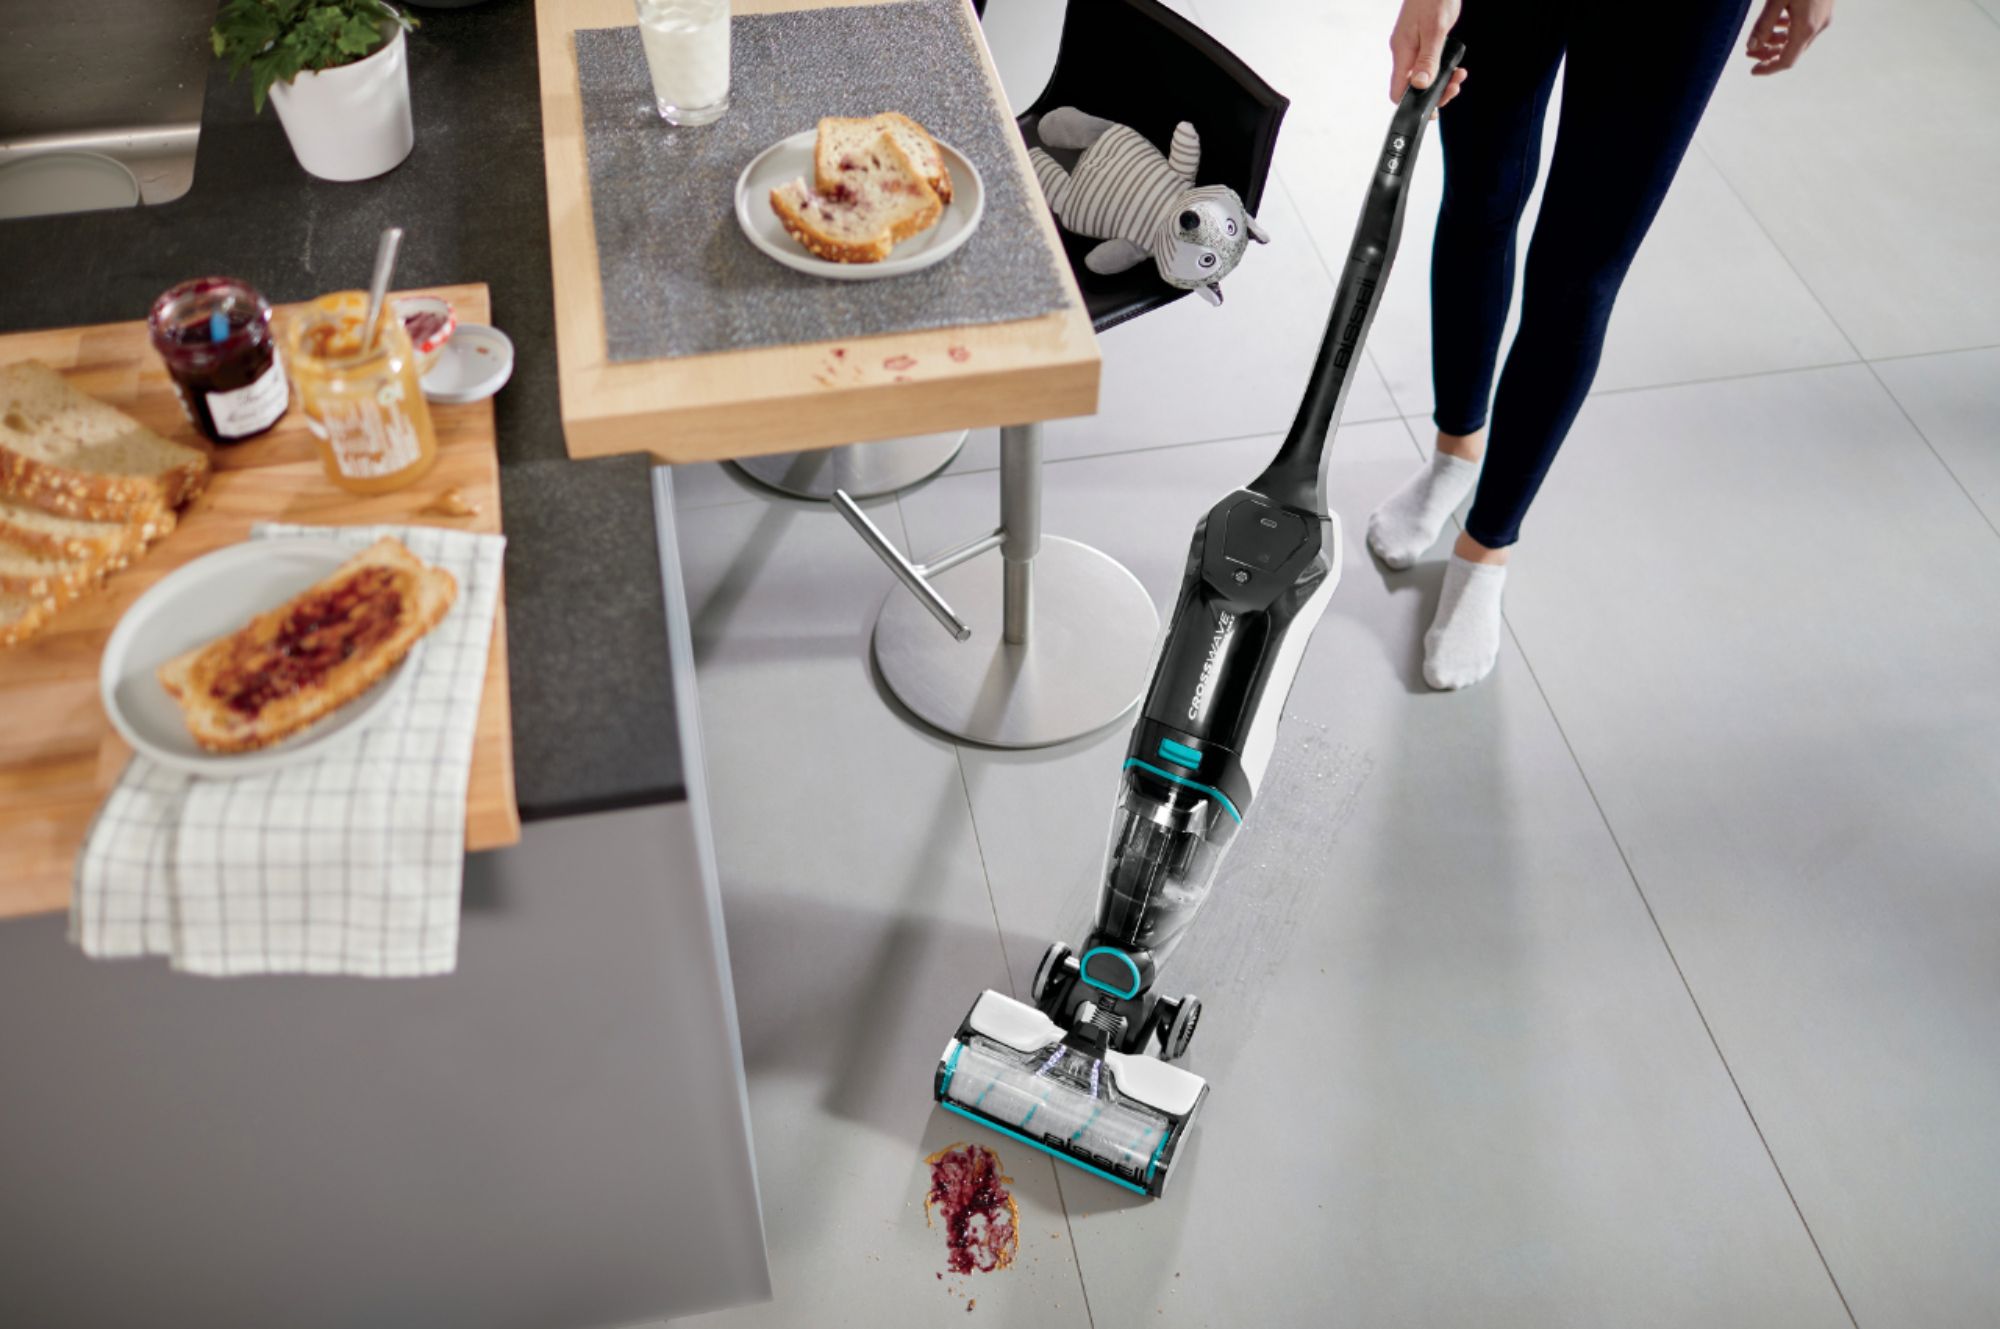 Bissell CrossWave Professional Multi-Surface Clean - eXtra Saudi